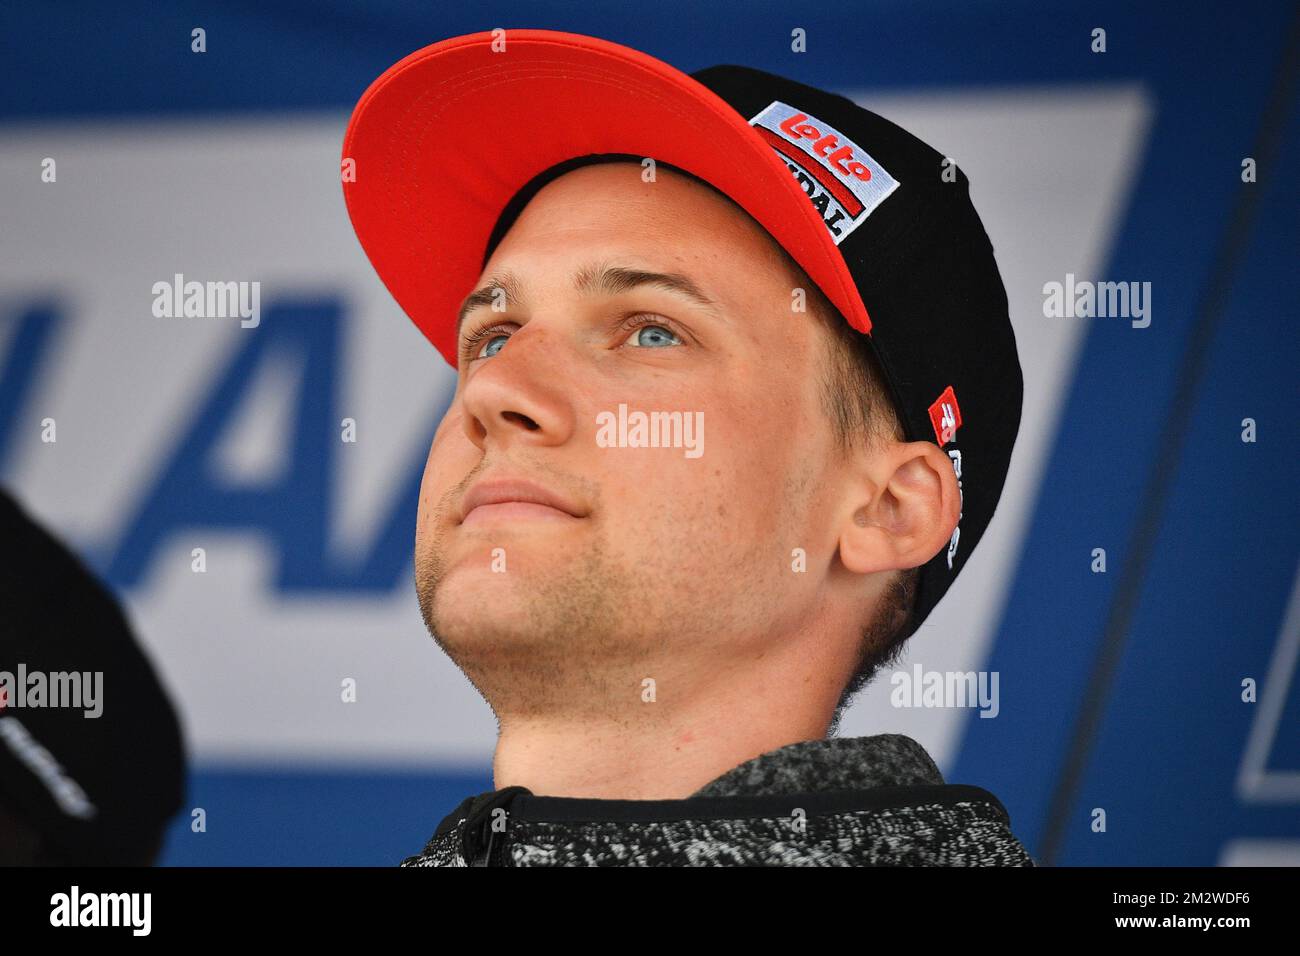 Belgian Tim Wellens of Lotto Soudal pictured during the team presentation ahead of the Baloise Belgium Tour cycling race, Tuesday 11 June 2019, in Sint-Niklaas. BELGA PHOTO DAVID STOCKMAN Stock Photo